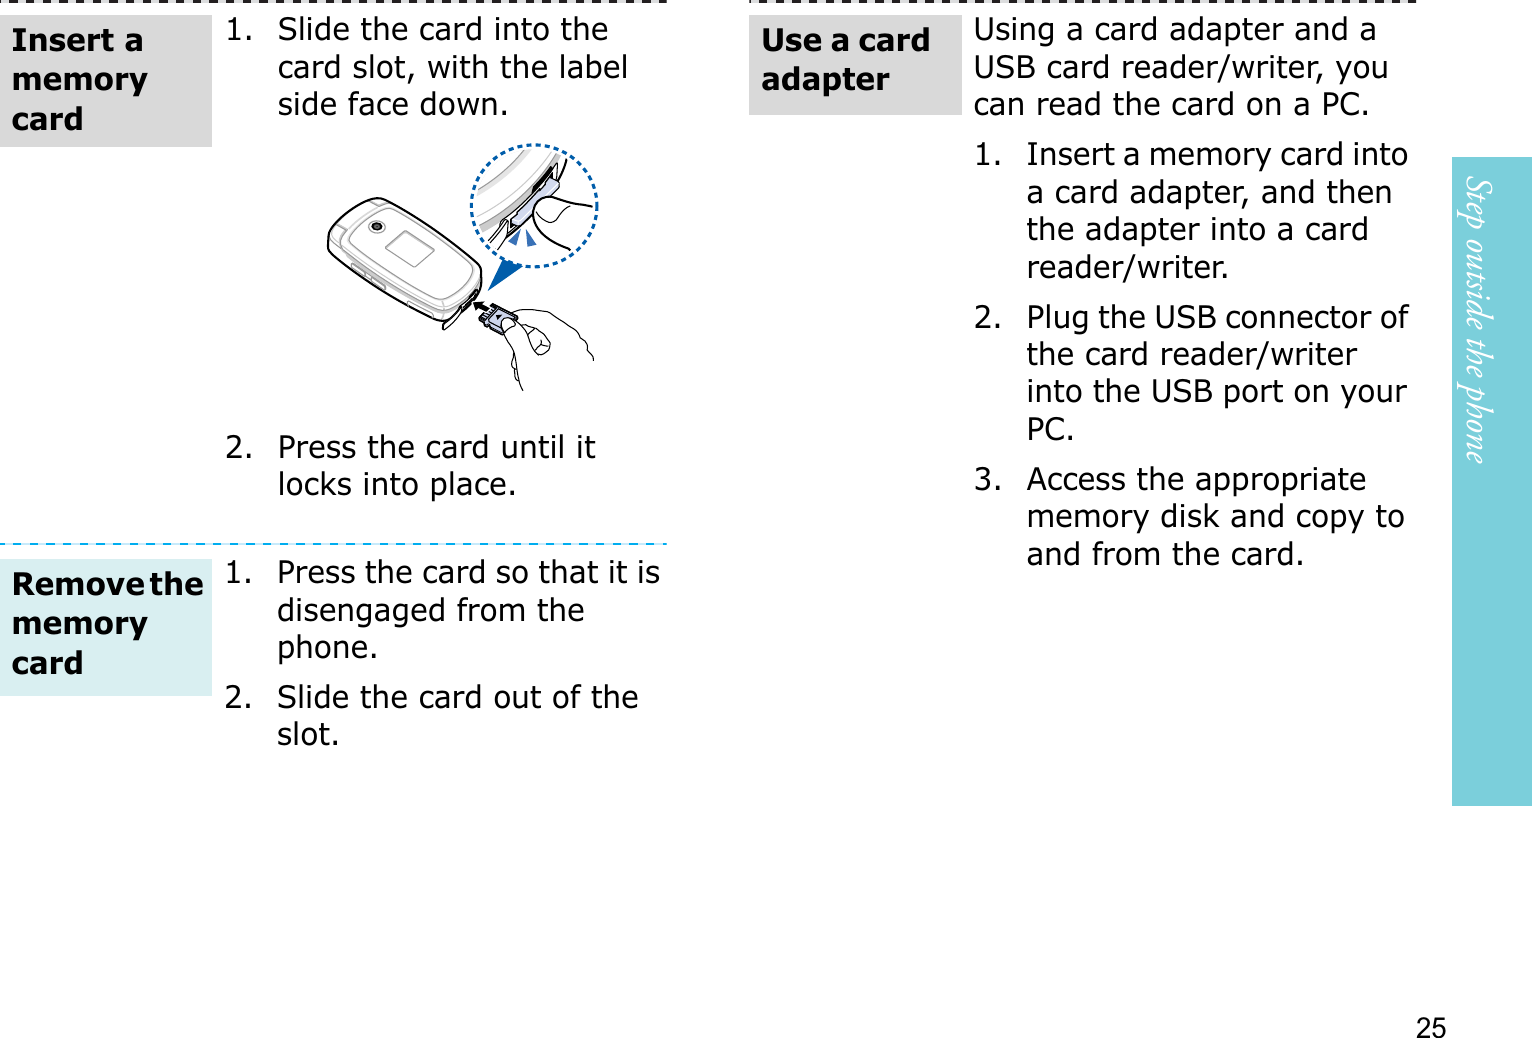 Step outside the phone251. Slide the card into the card slot, with the label side face down.2. Press the card until it locks into place.1. Press the card so that it is disengaged from the phone.2. Slide the card out of the slot.Insert a memory cardRemove thememory cardUsing a card adapter and a USB card reader/writer, you can read the card on a PC.1. Insert a memory card into a card adapter, and then the adapter into a card reader/writer.2. Plug the USB connector of the card reader/writer into the USB port on your PC.3. Access the appropriate memory disk and copy to and from the card.Use a card adapter